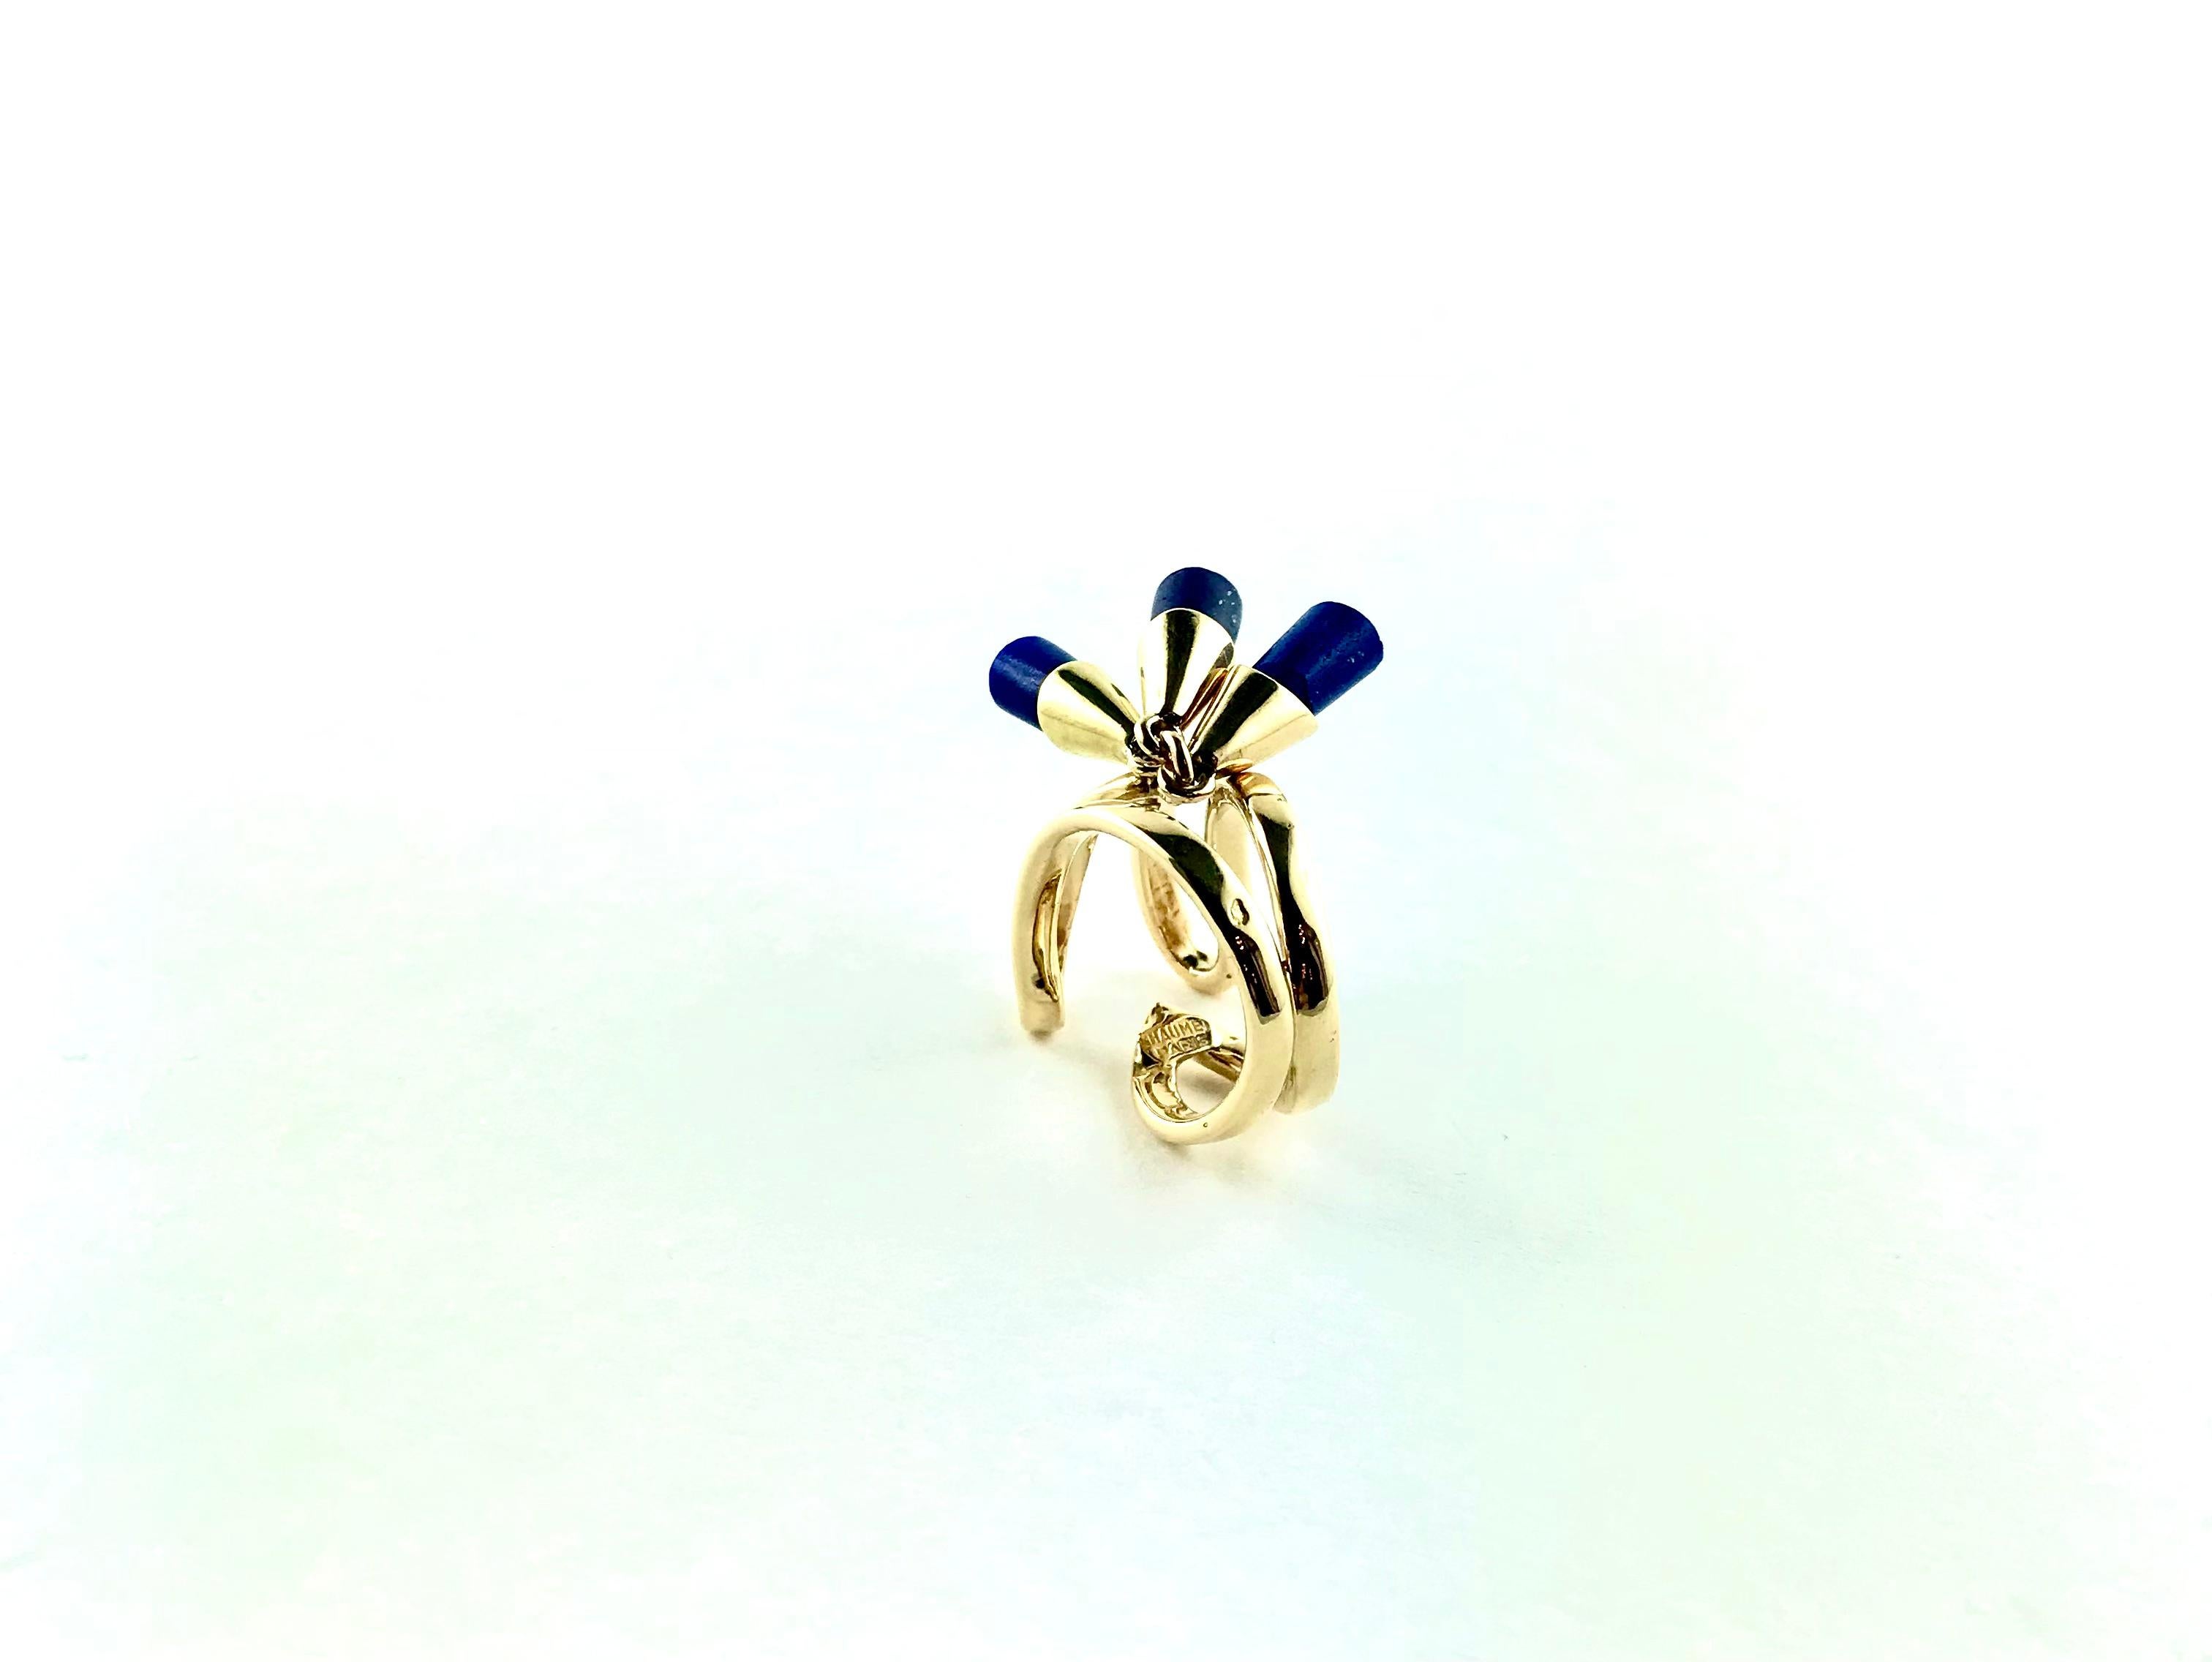 Sleek and  classy multi-charm 1970s Ring, designed by french jeweler Chaumet and crafted in 18k polished finish Yellow Gold,  featuring three  separate dangling  Lapislazuli tassels dispersing laterally over the finger and securely attached to the